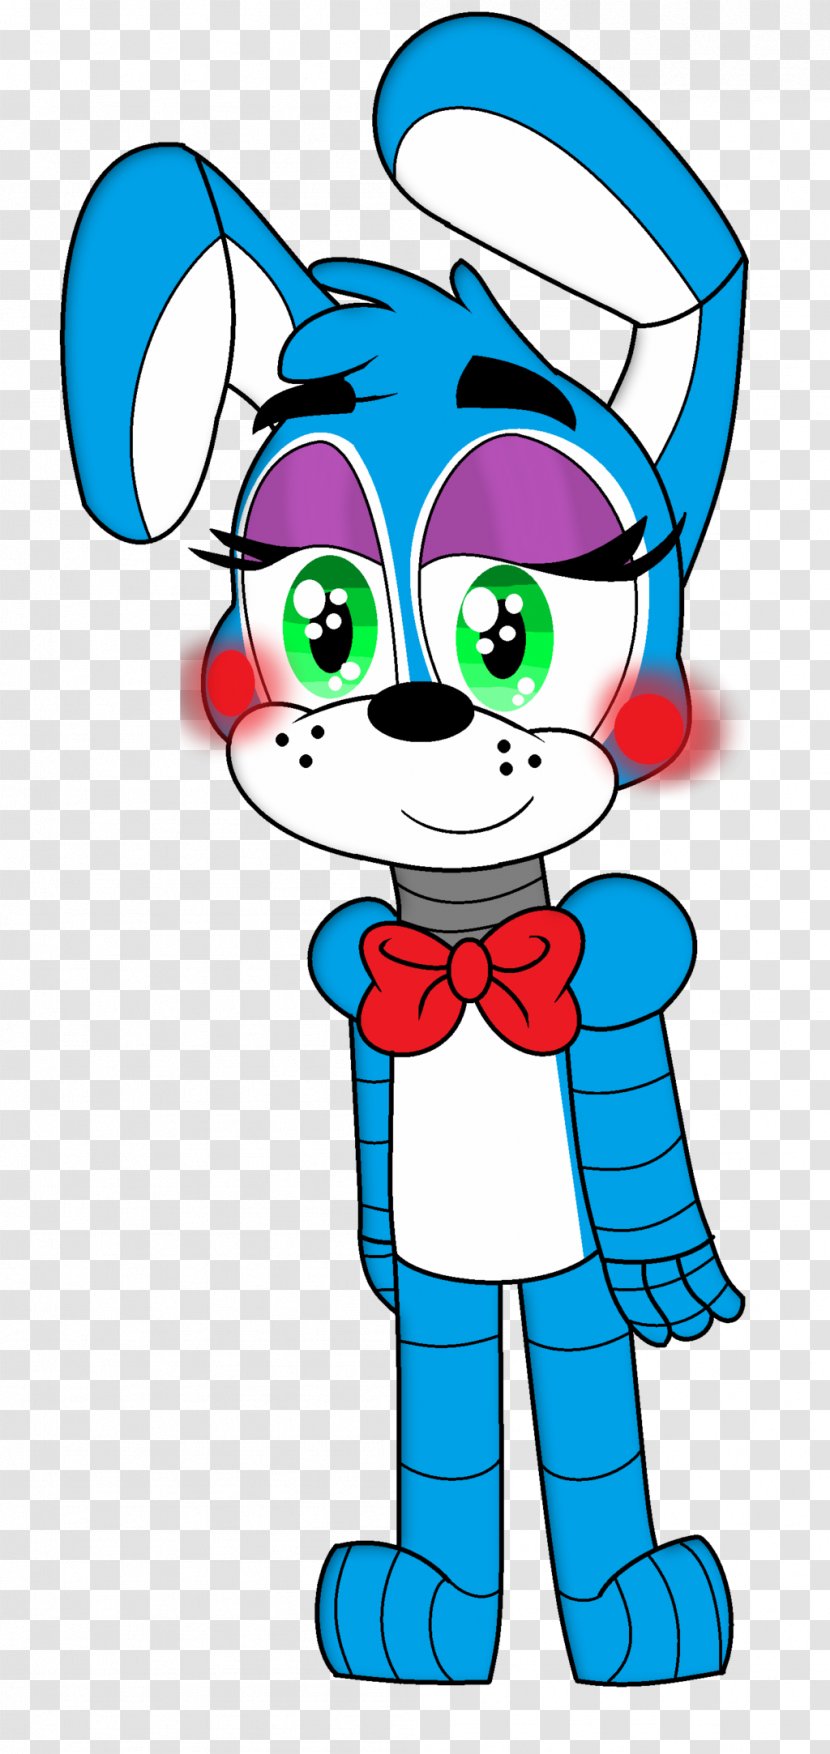 Five Nights At Freddy's 2 Drawing DeviantArt - Silhouette - Bonnie Transparent PNG